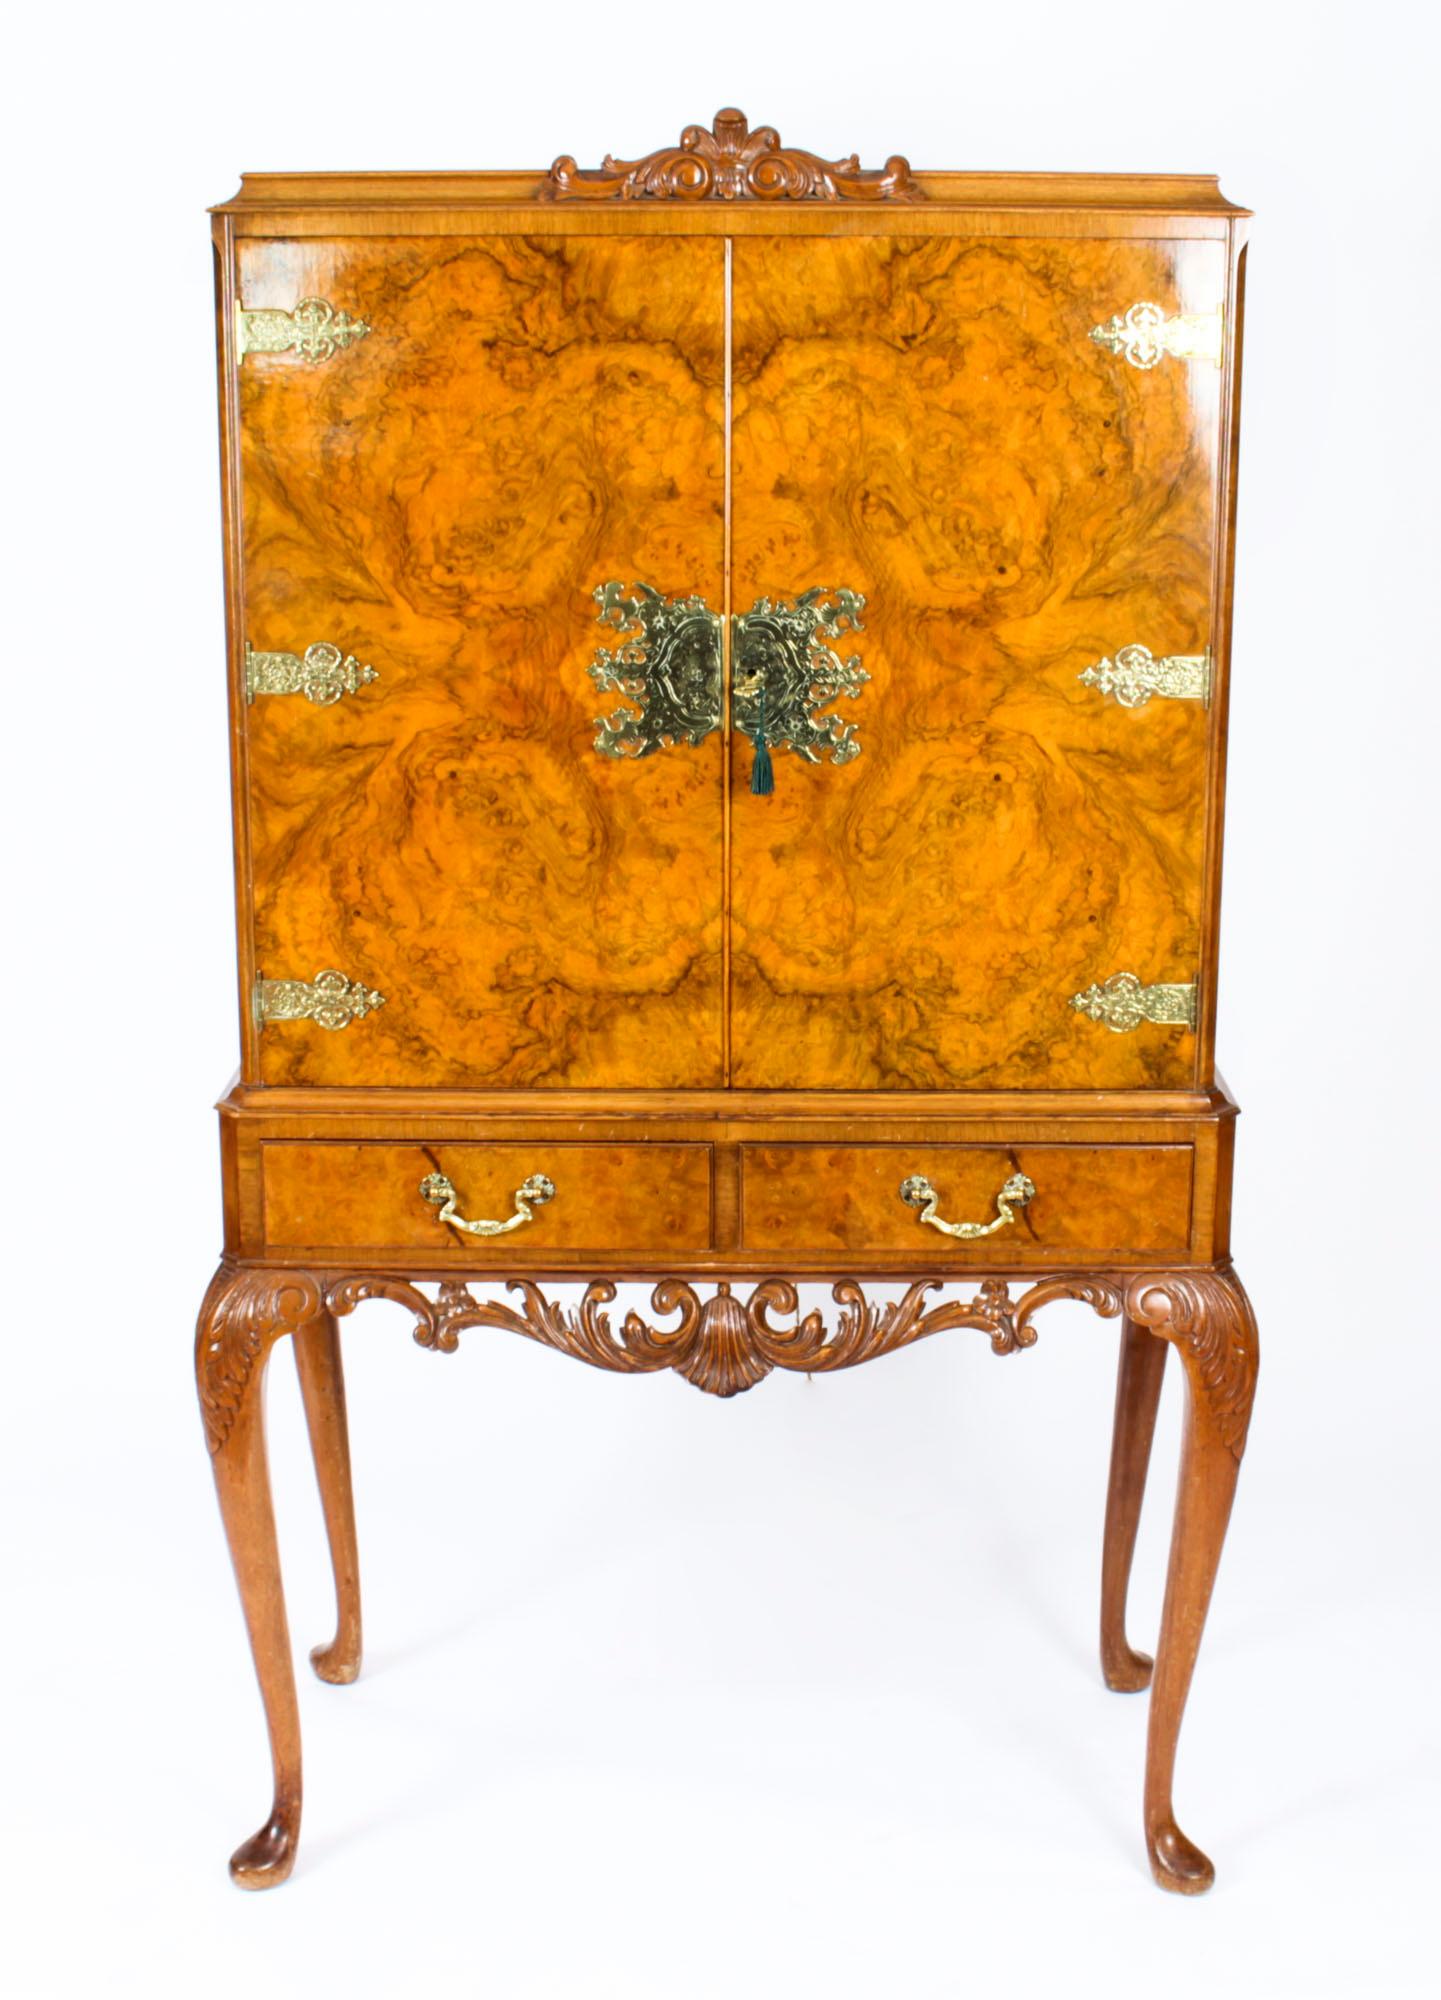 This is a fantastic vintage Queen Anne Revival burr walnut cocktail cabinet with wonderful hand carved decoration dating from the mid-20th century.

The doors open to reveal a stunning fitted maple fitted interior with mirrored back, a glass shelf